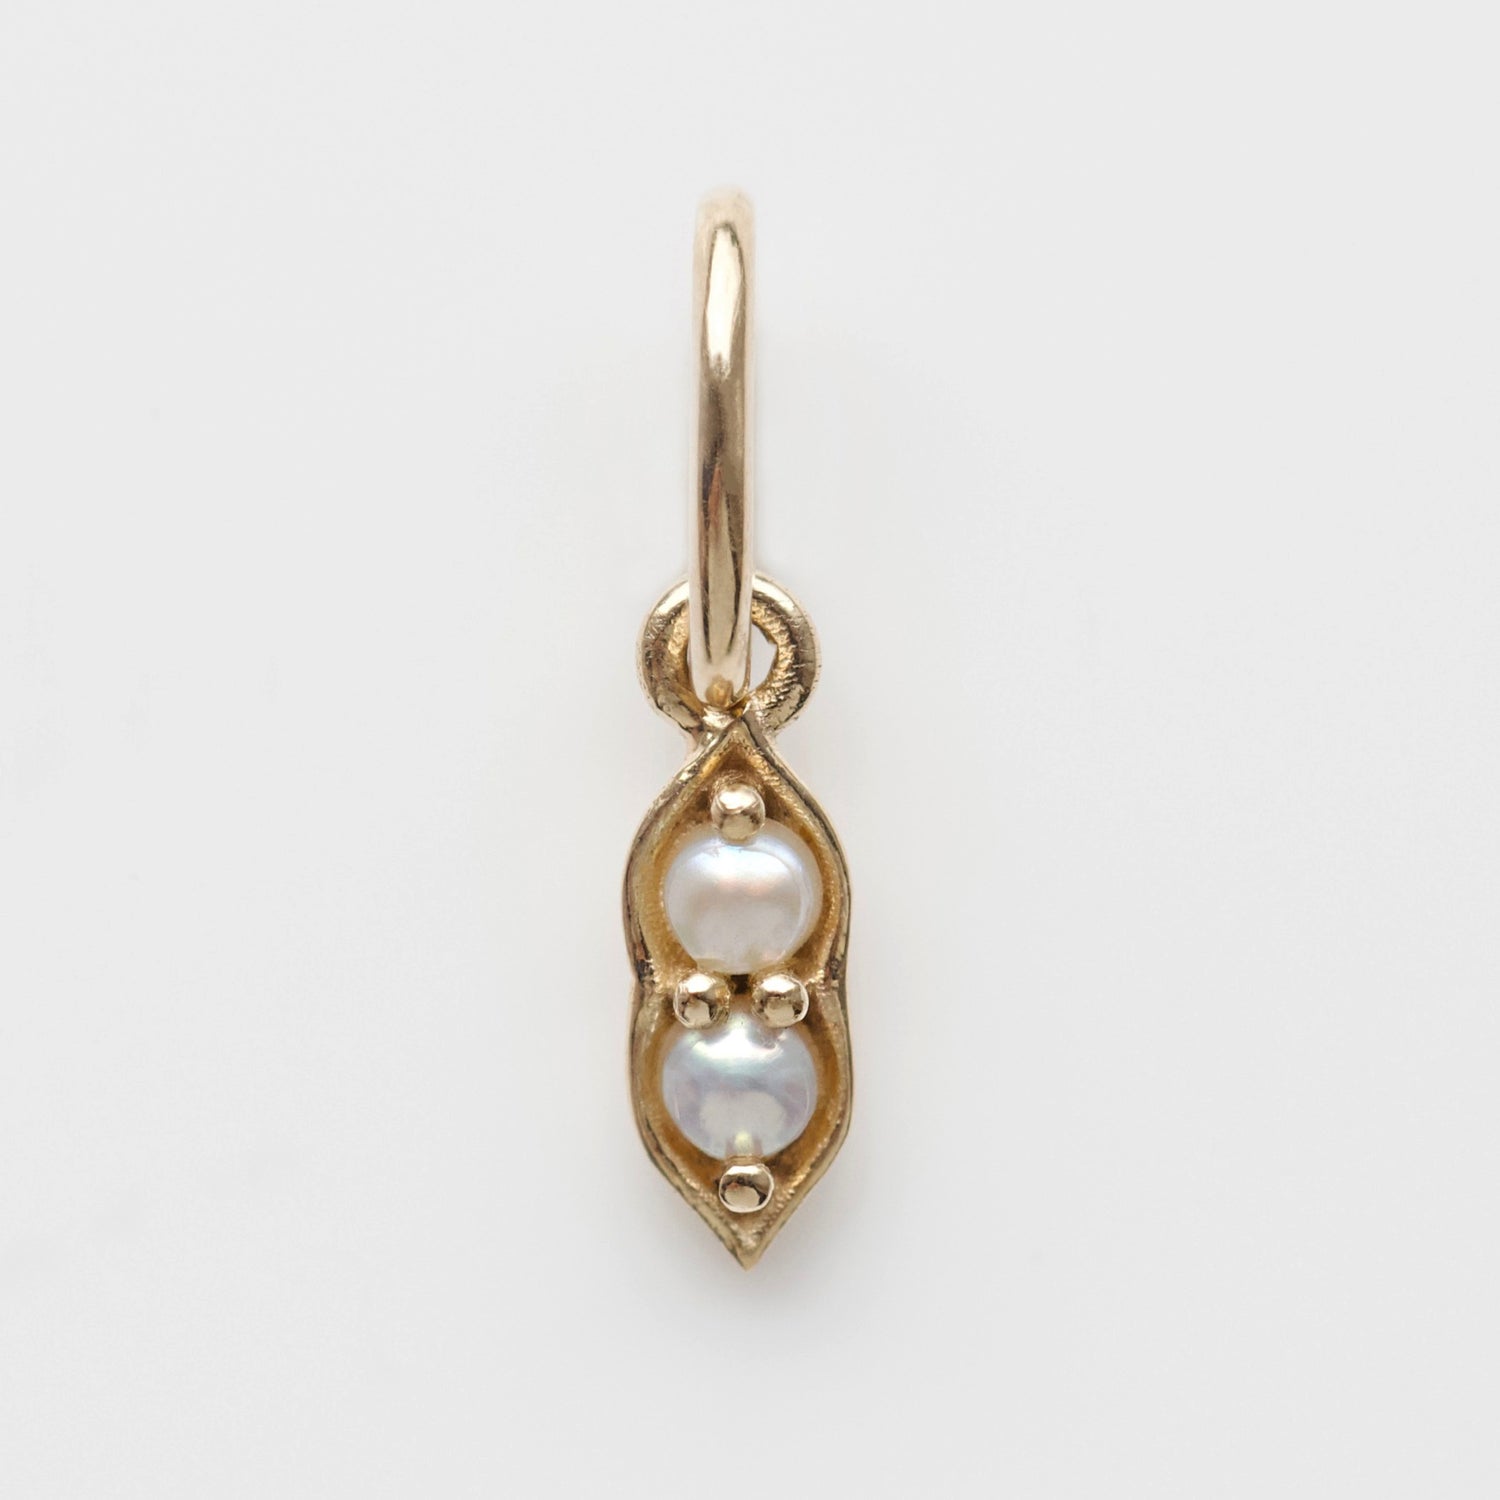 peas in a pod treasured charm in solid gold